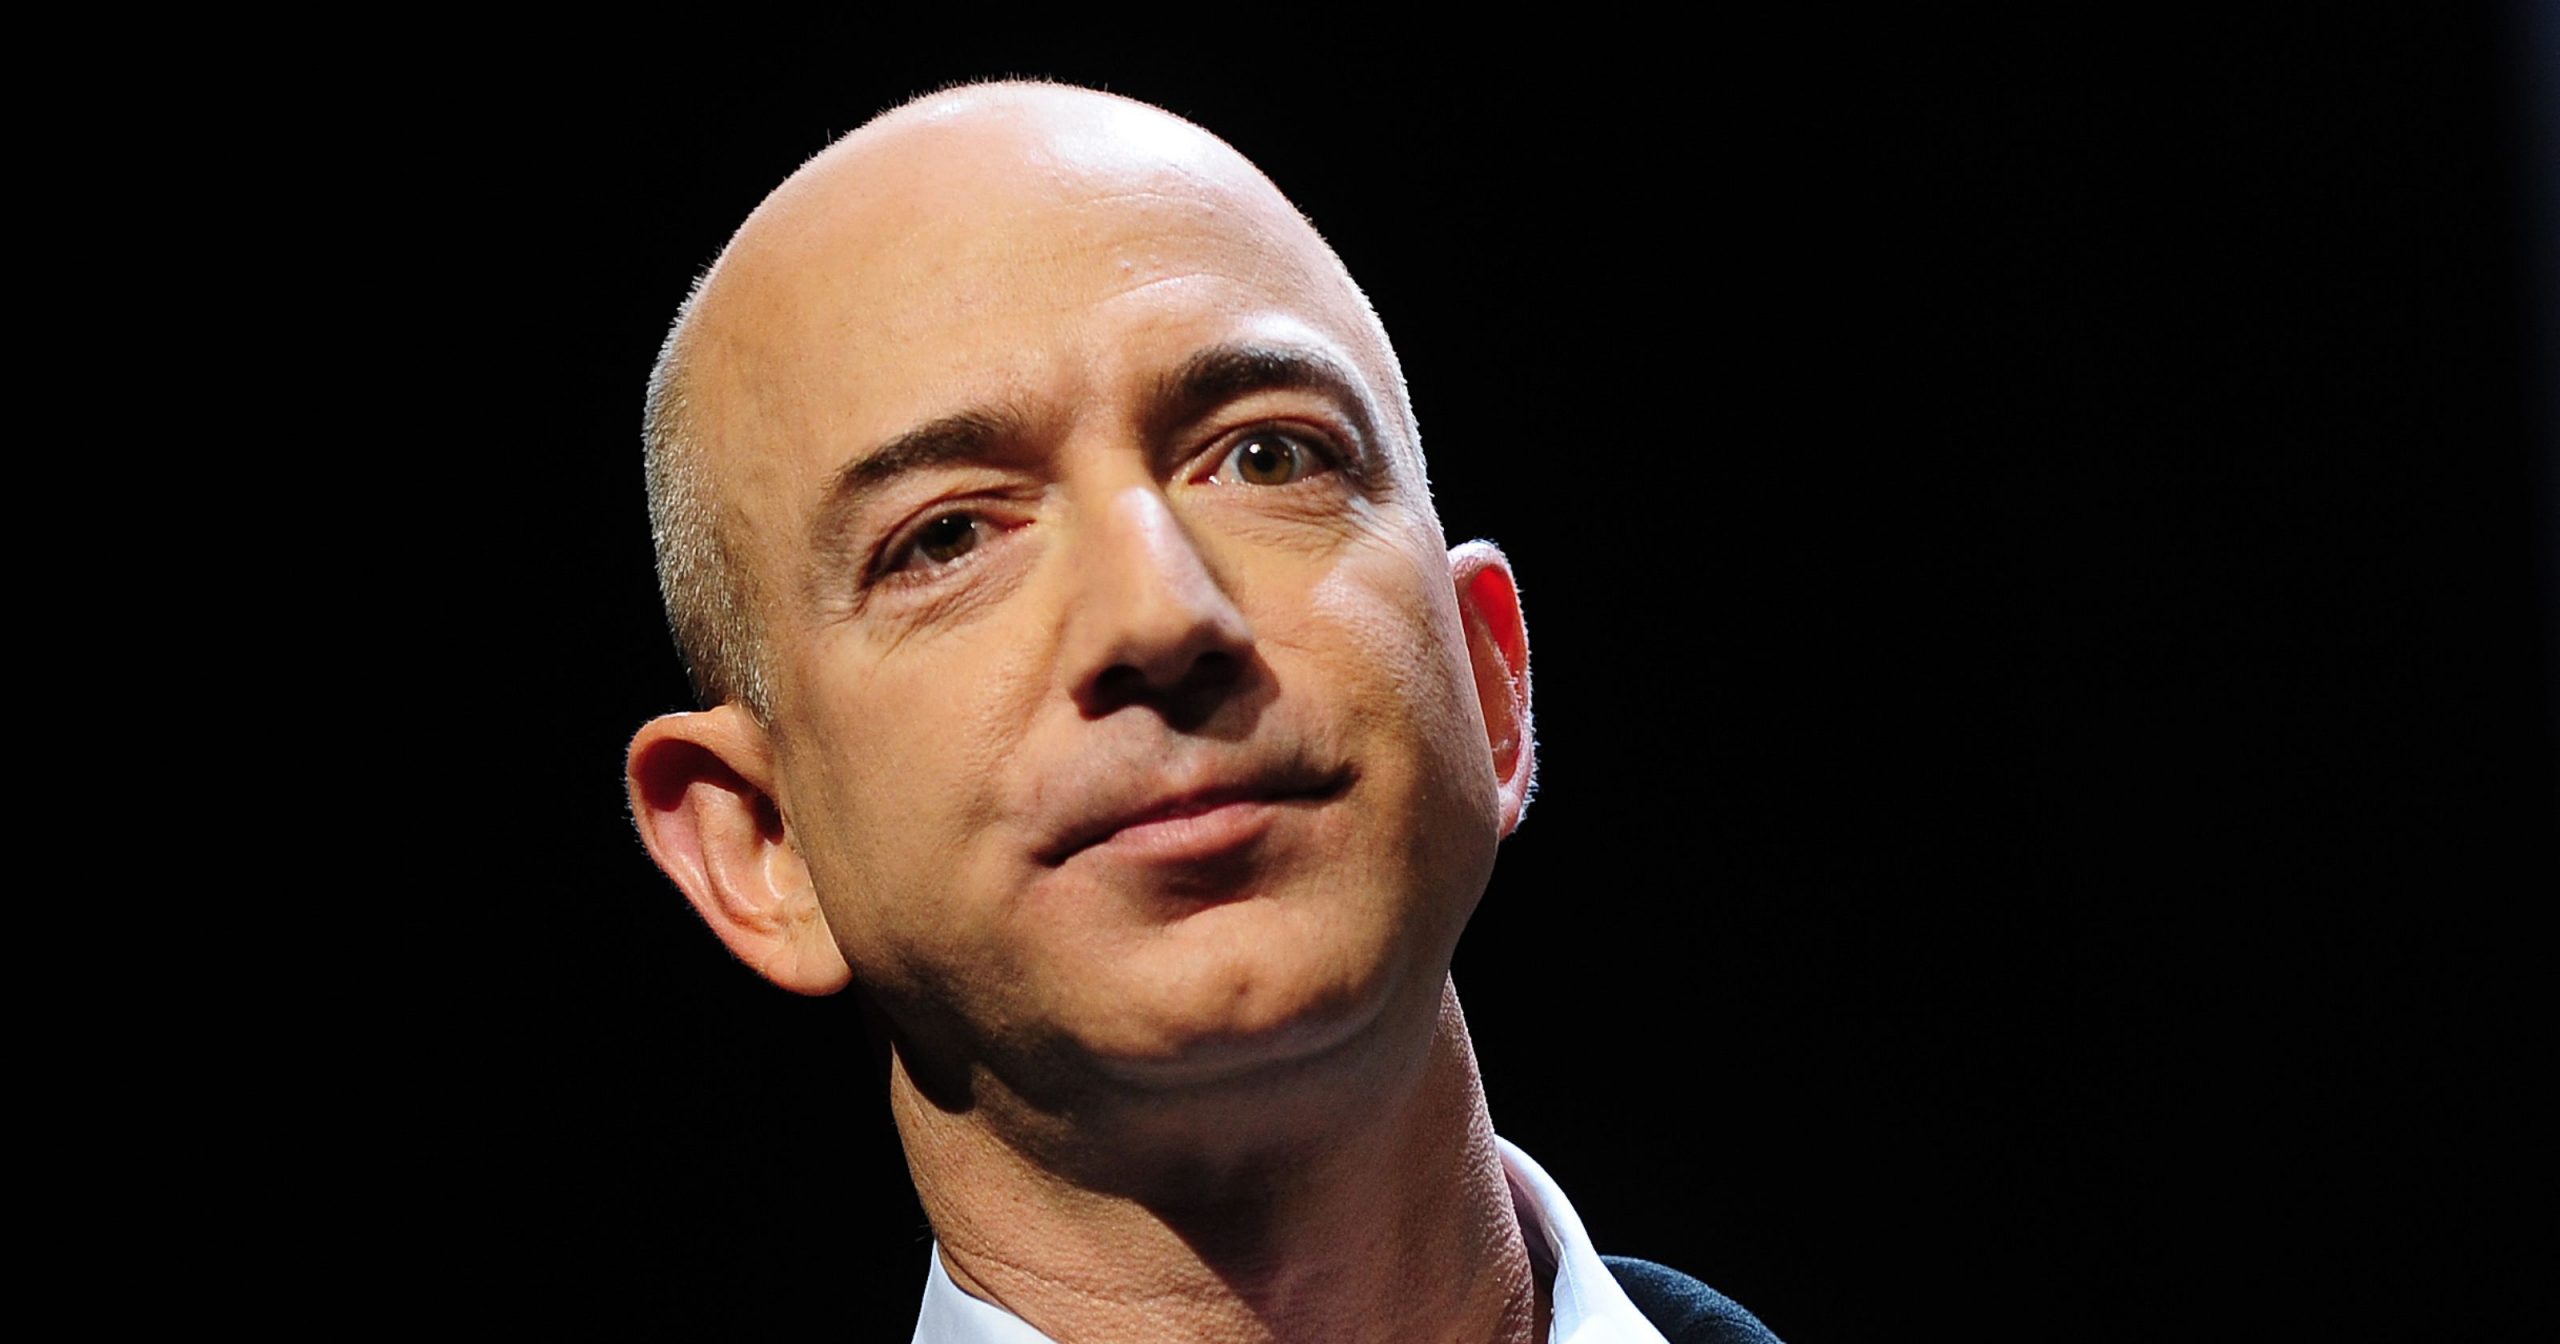 Bezos: Amazon delivering more of its own parcels in UK